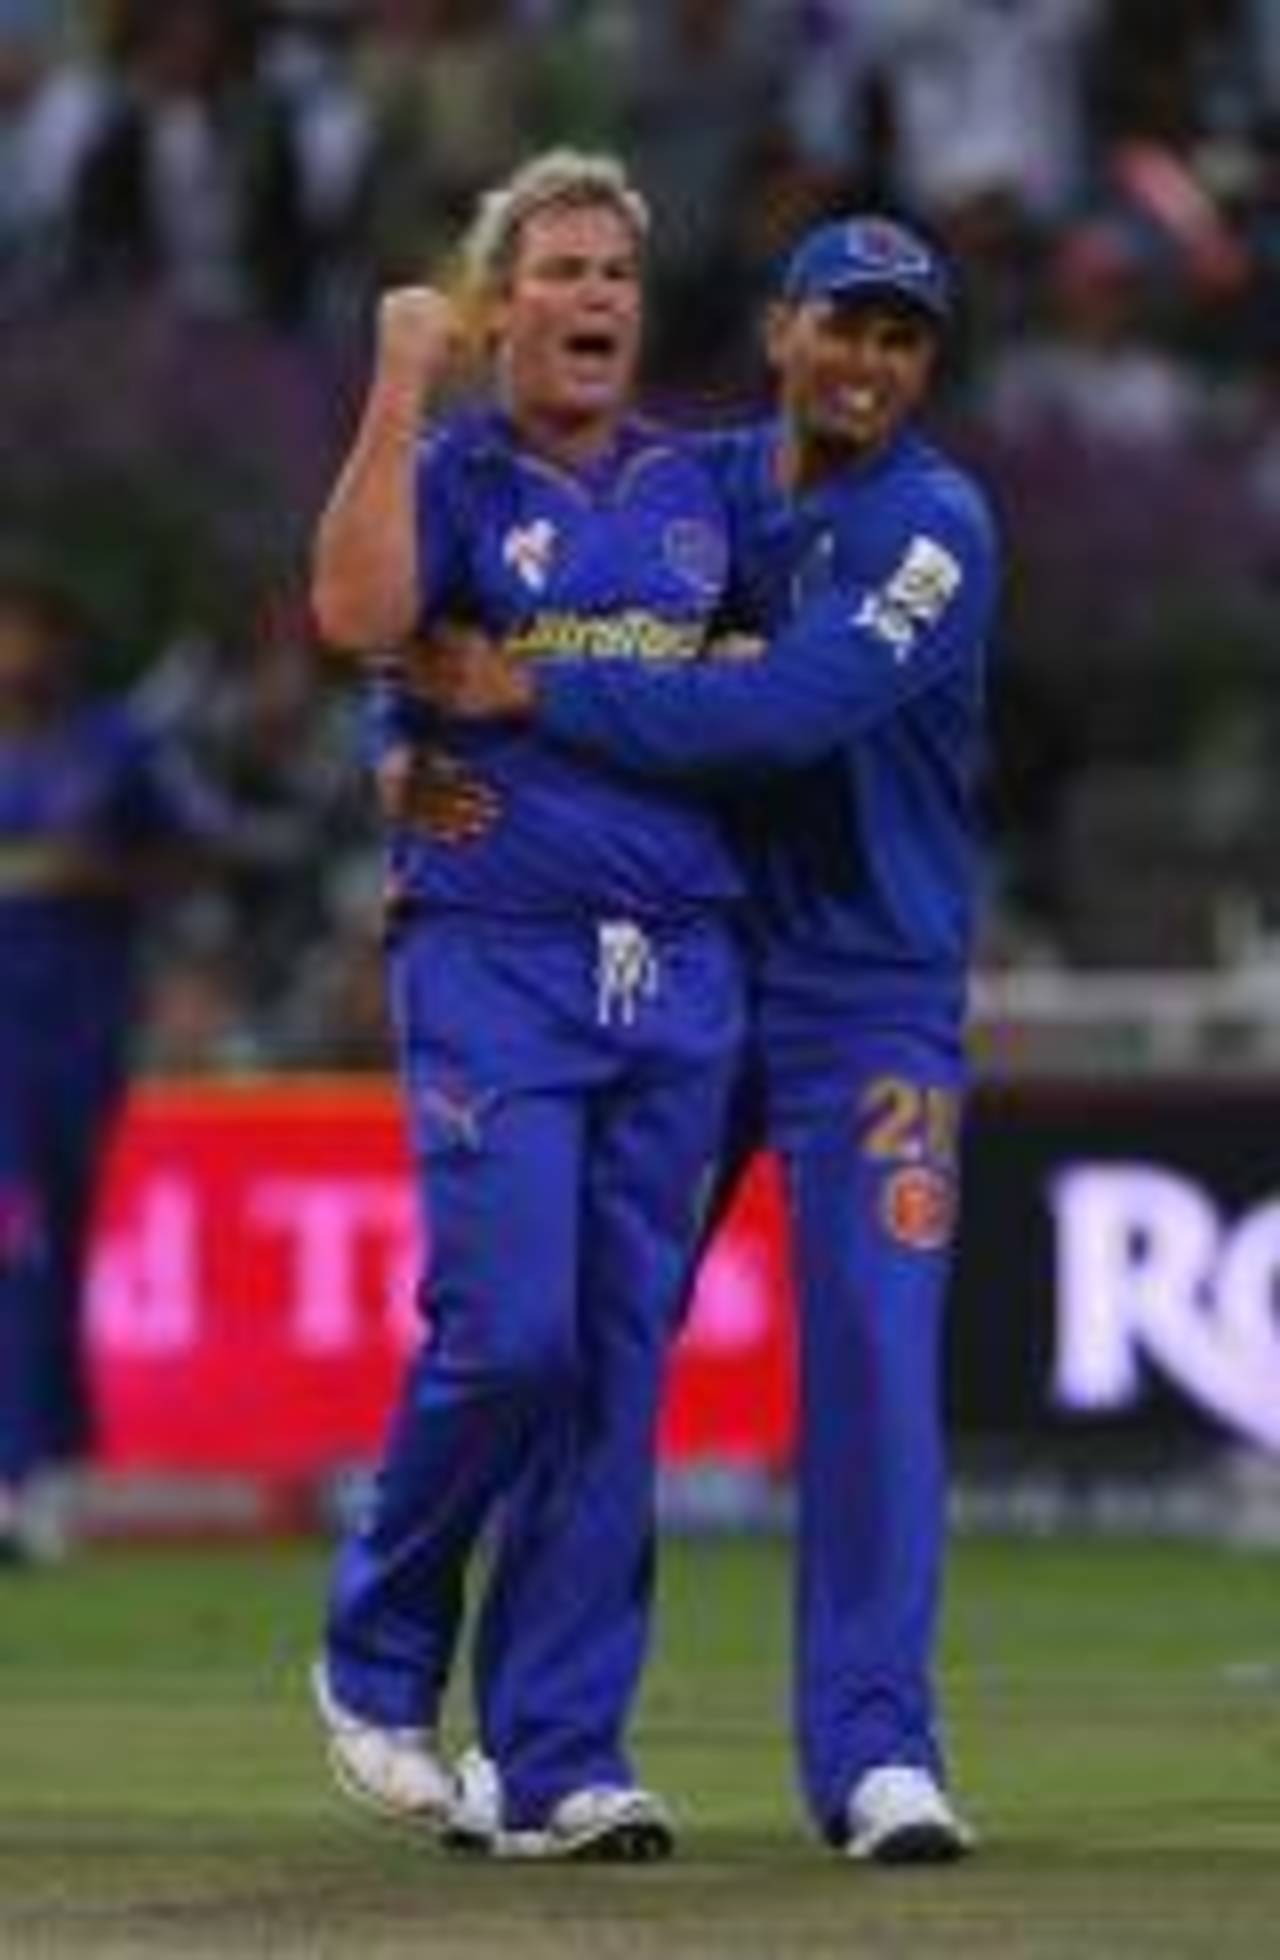 Shane Warne proved that he still had plenty in him, Bangalore Royal Challengers v Rajasthan Royals, IPL, 2nd game, Cape Town, April 18, 2009